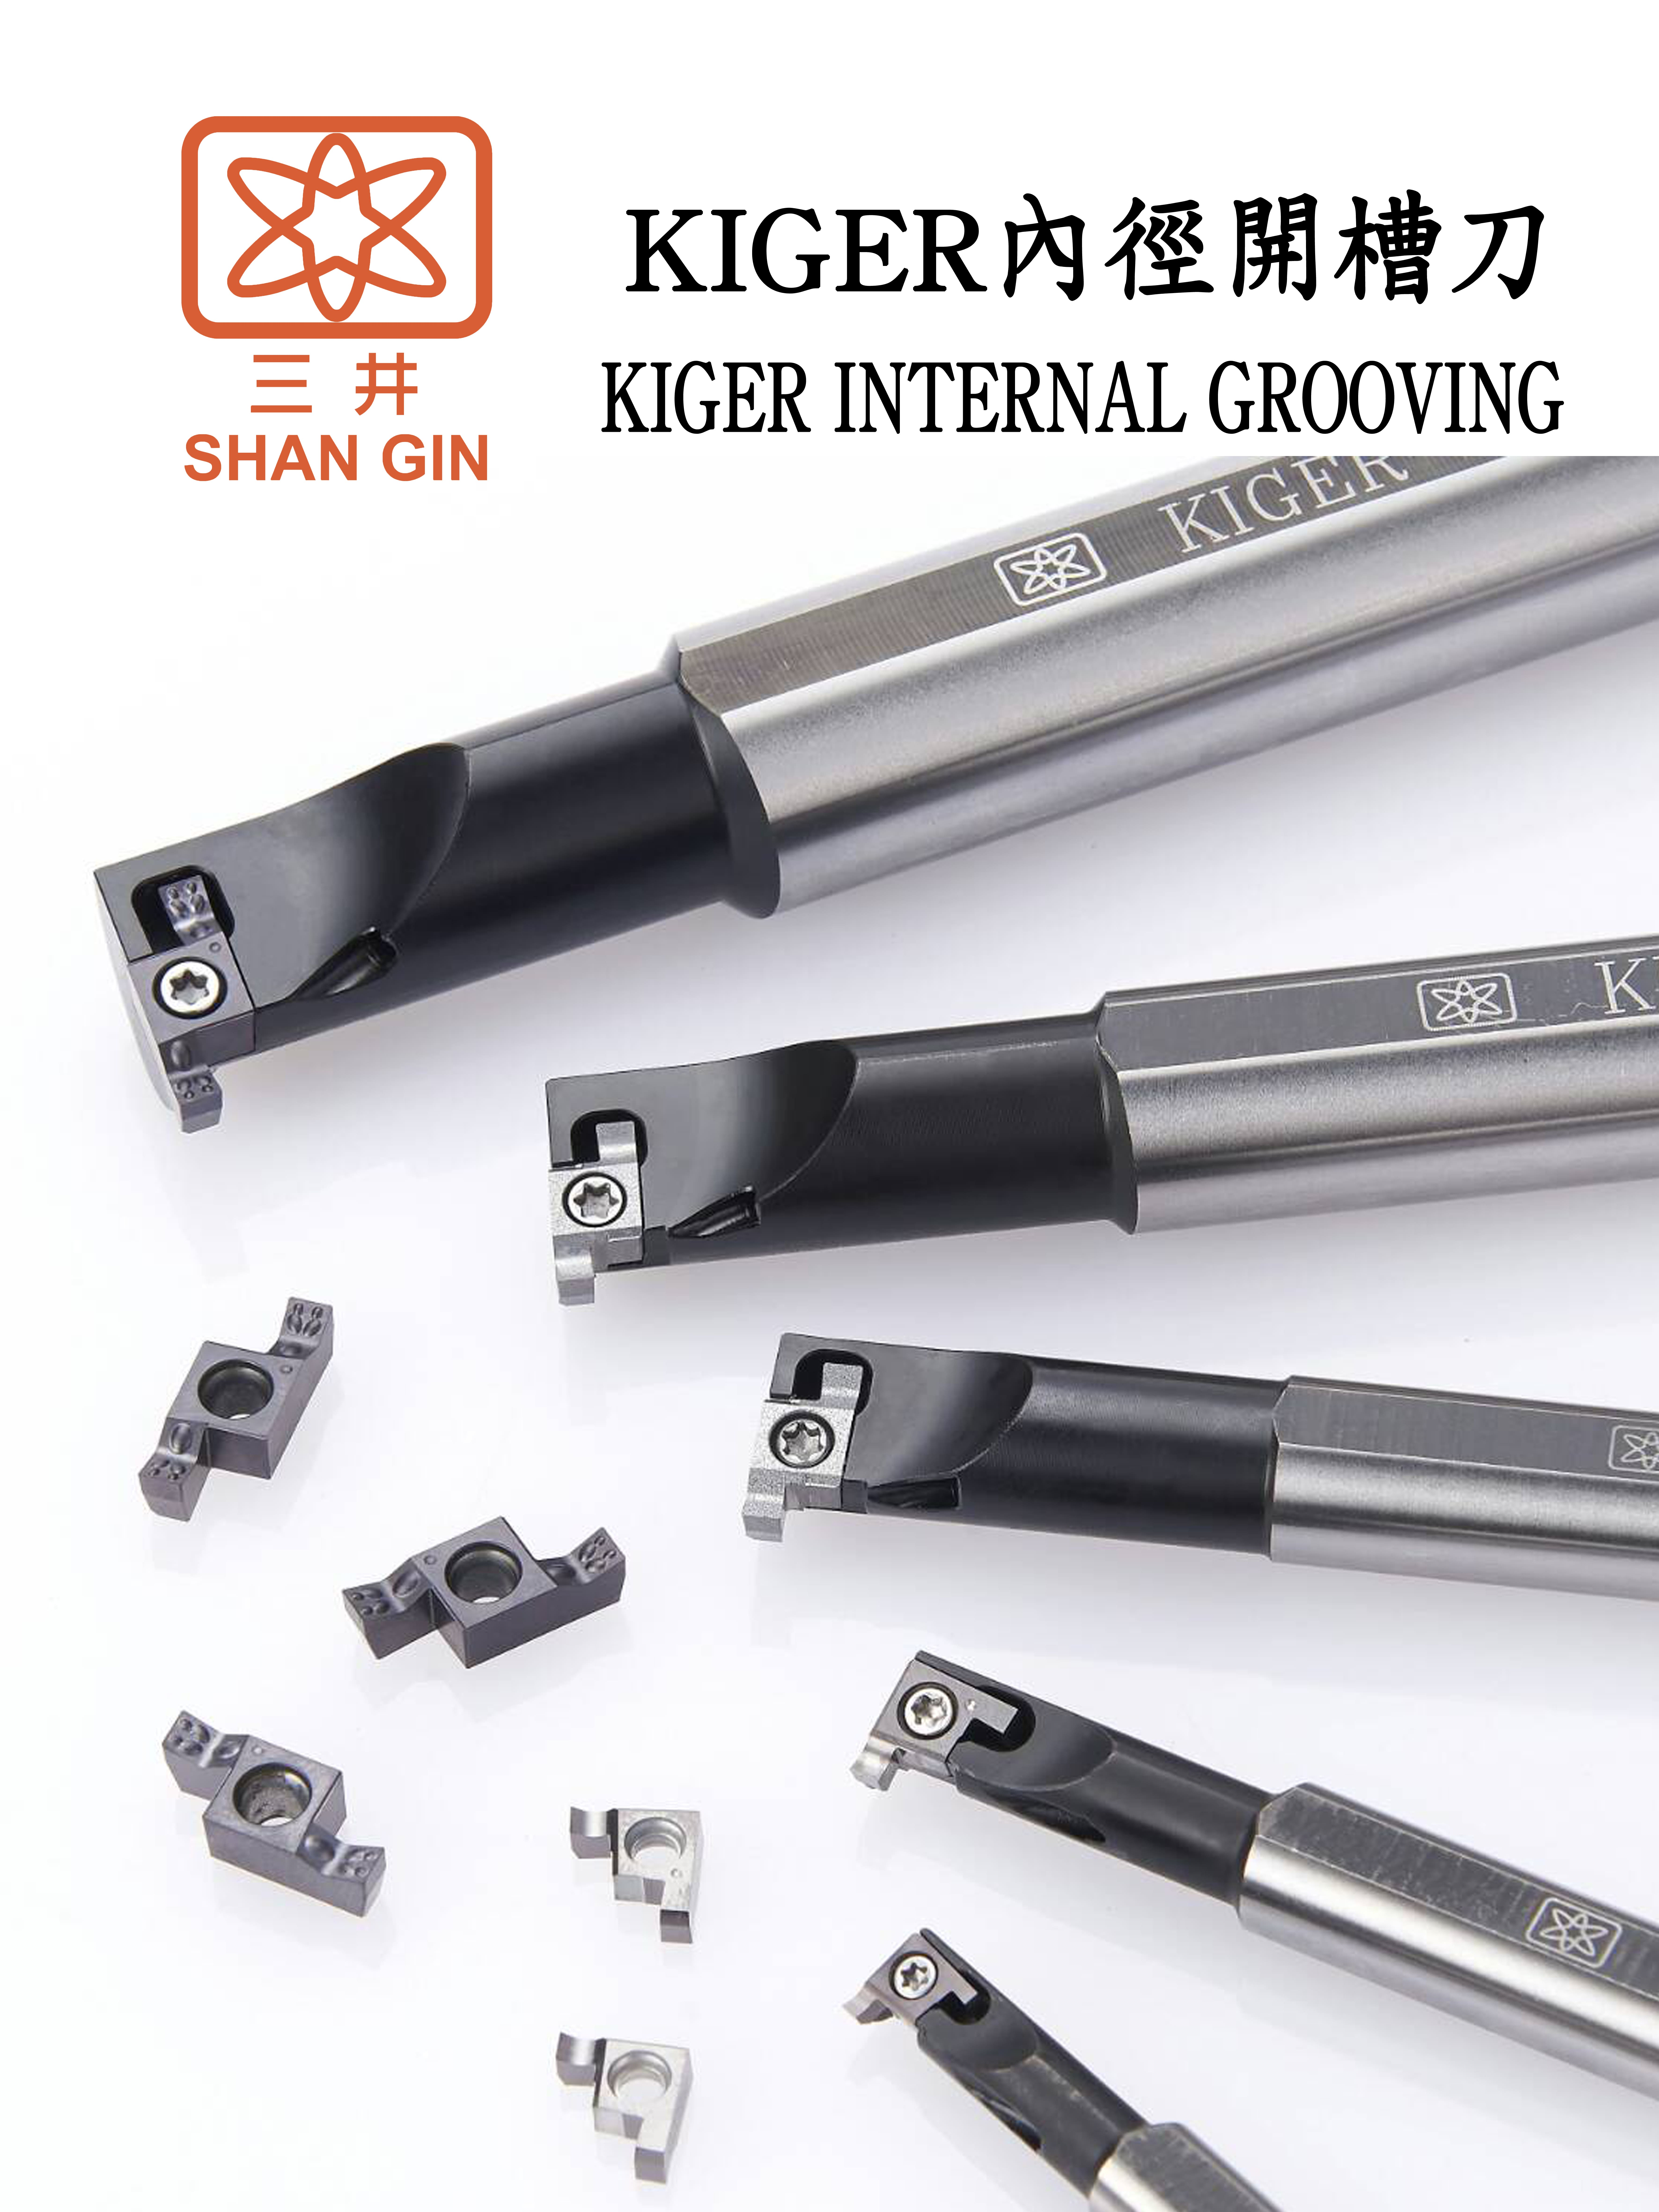 Products|KIGER INTERNAL GROOVING